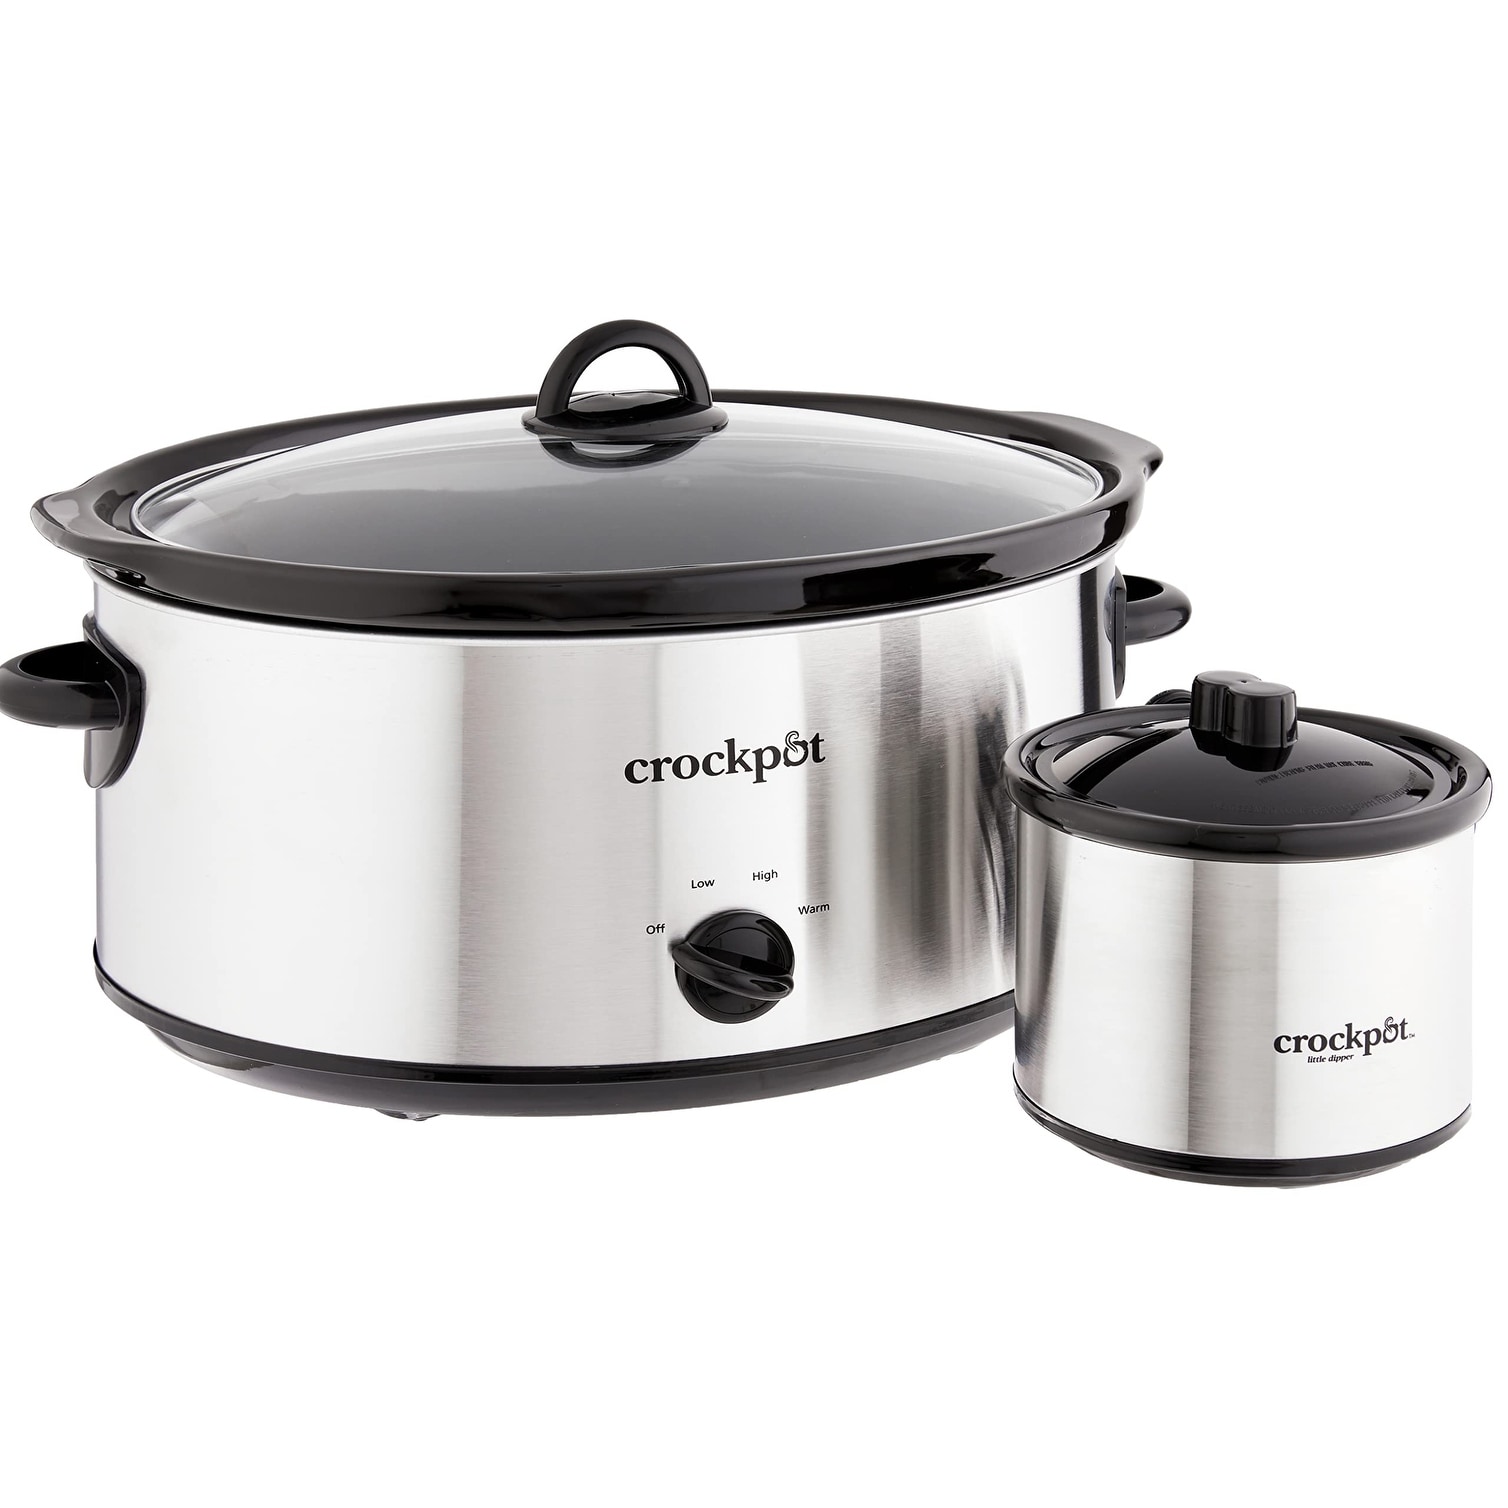 https://ak1.ostkcdn.com/images/products/is/images/direct/3fad6bb40509b3d7061985ffecfa60bb94633682/Large-8-Quart-Slow-Cooker-with-Small-Mini-16-Ounce-Portable-Food-Warmer%2C-Kitchen-Appliance-Bundles%2C-Stainless-Steel.jpg